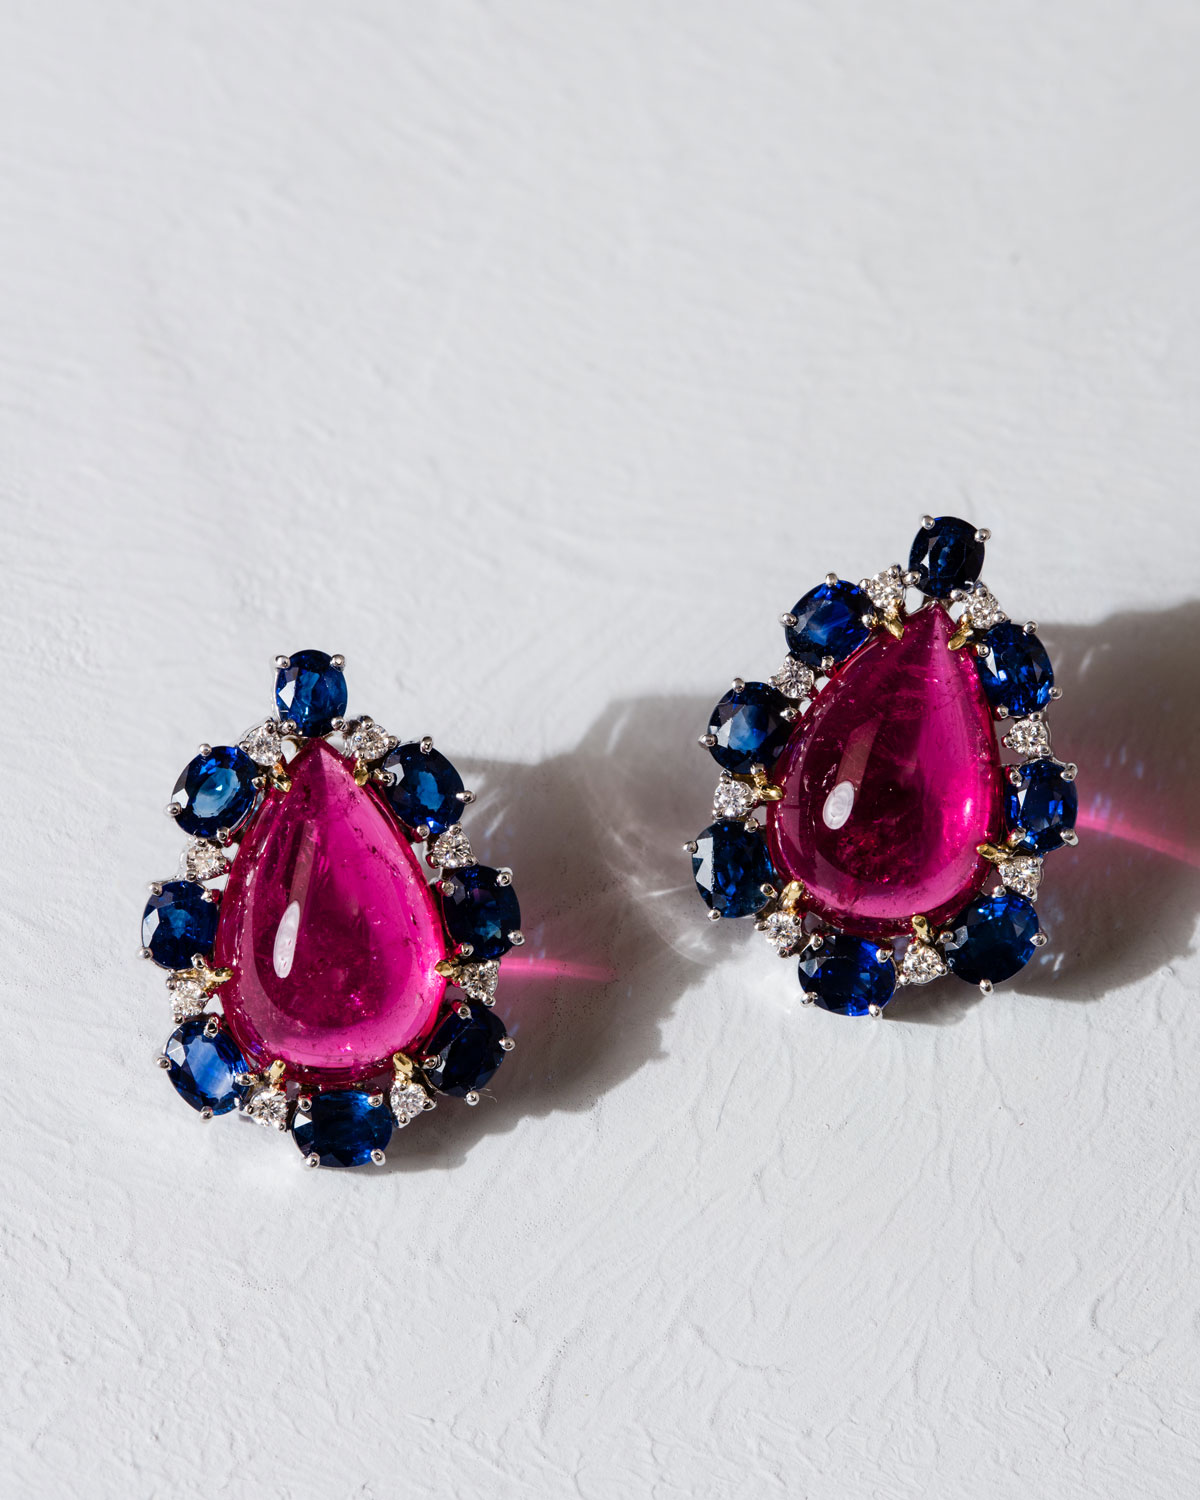 webPaul-Syjuco-earrings-of-pink-tourmaline-cabochons-ceylon-sapphires-and-diamonds